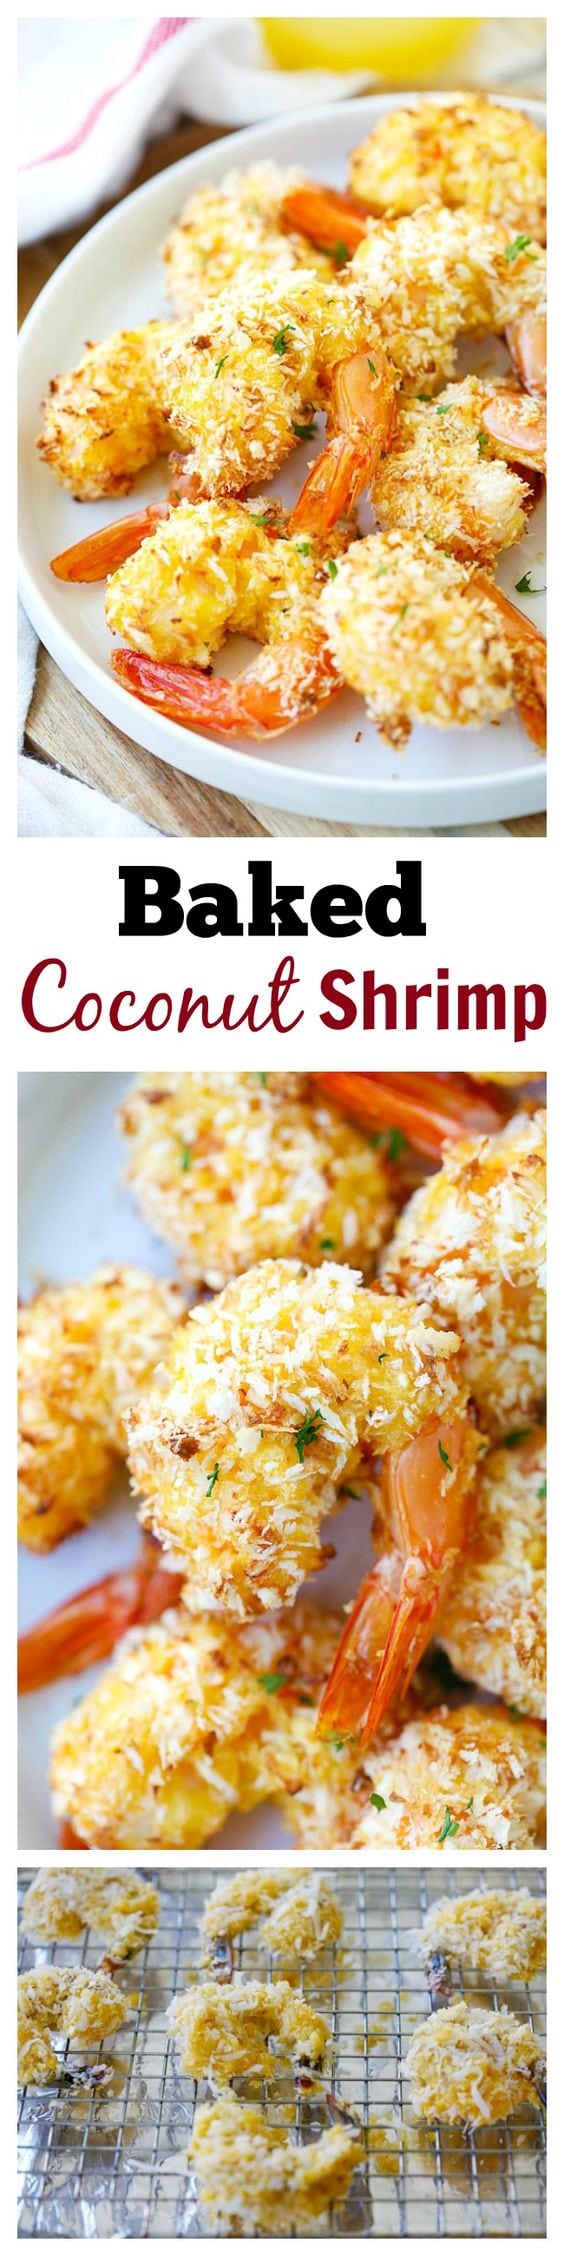 Baked Coconut Shrimp – EASIEST and BEST coconut shrimp with no deep-frying, no oil, no mess!! Bake in oven for 20 mins, delicious, healthy & budget-friendly!! | rasamalaysia.com